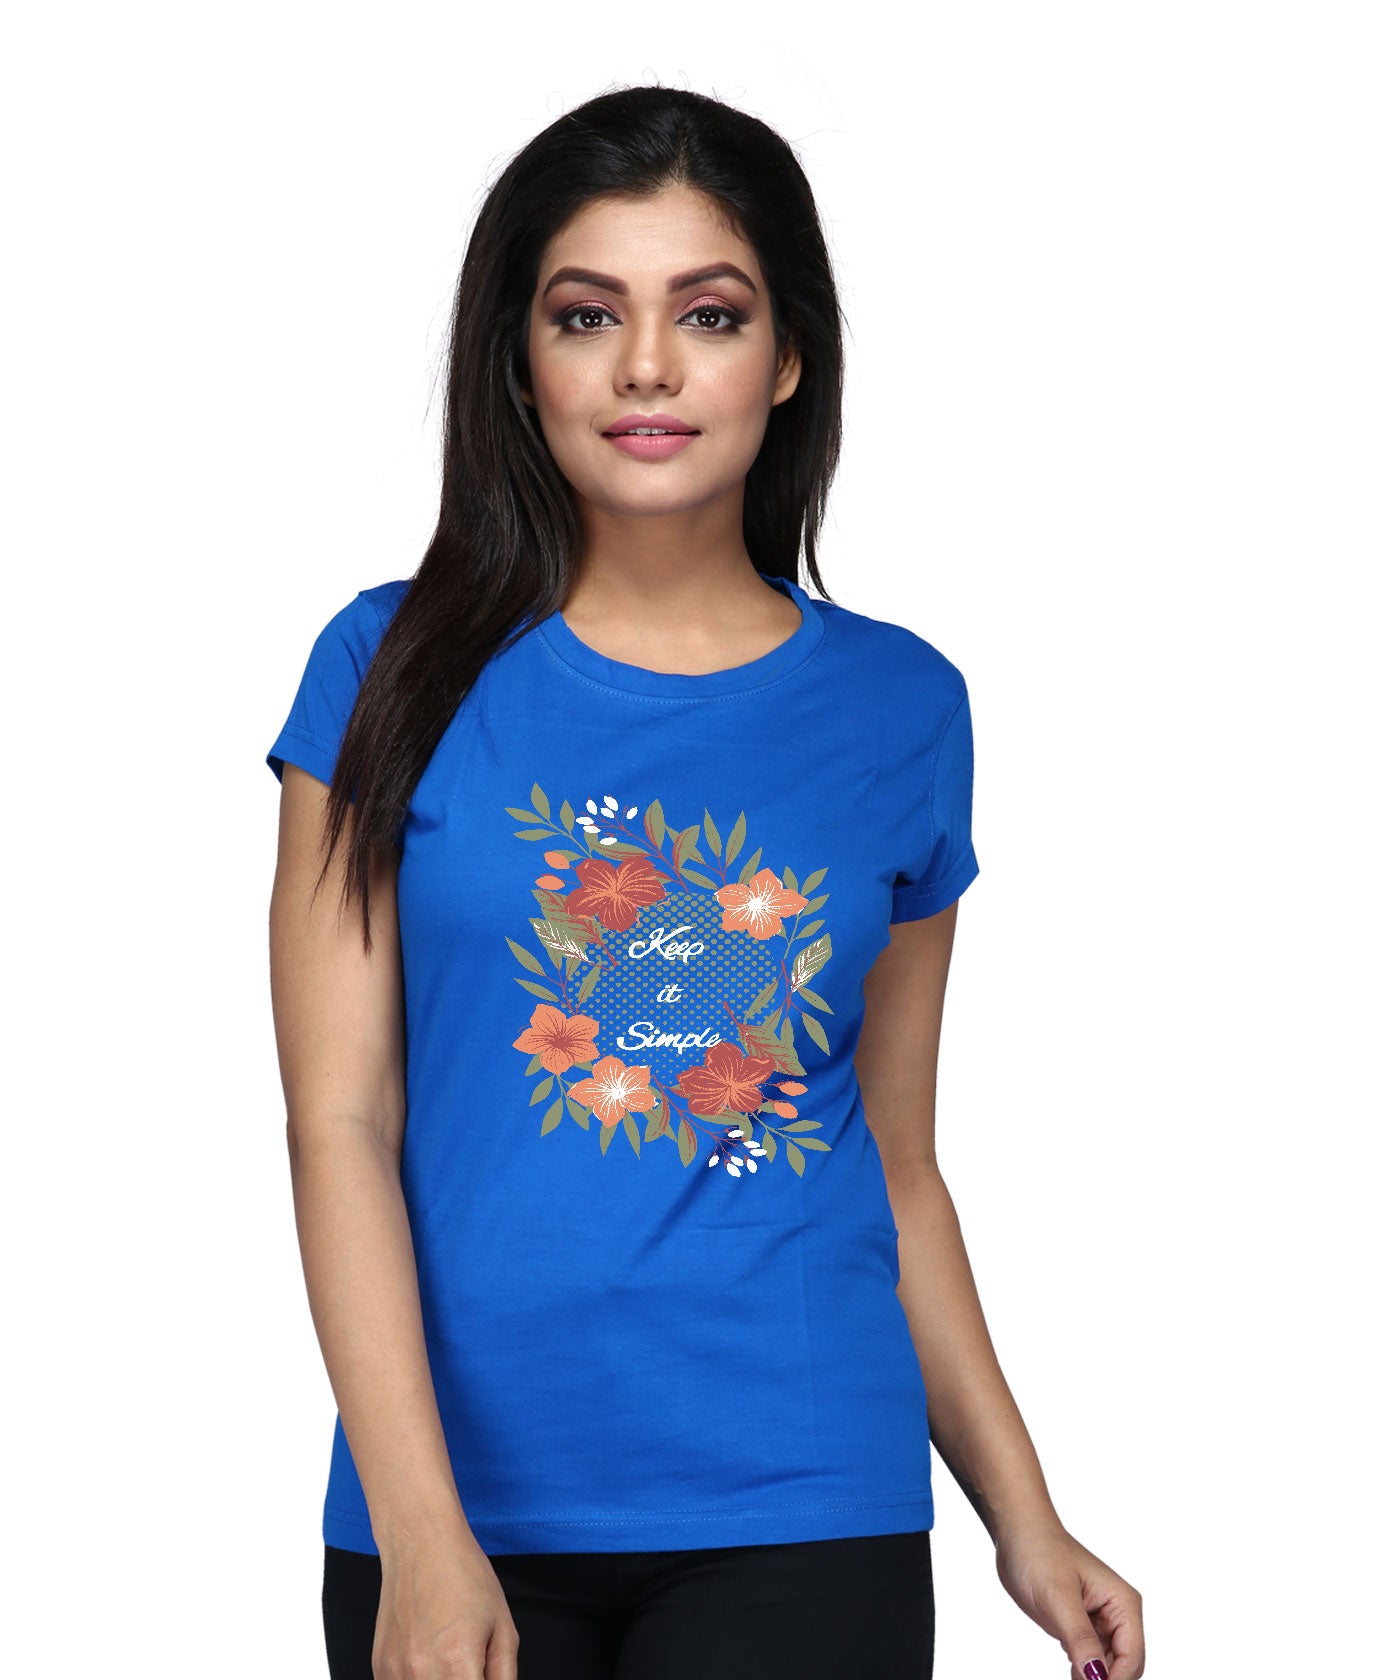 Keep it Simple - Premium Round Neck Cotton Tees for Women - Electric Blue